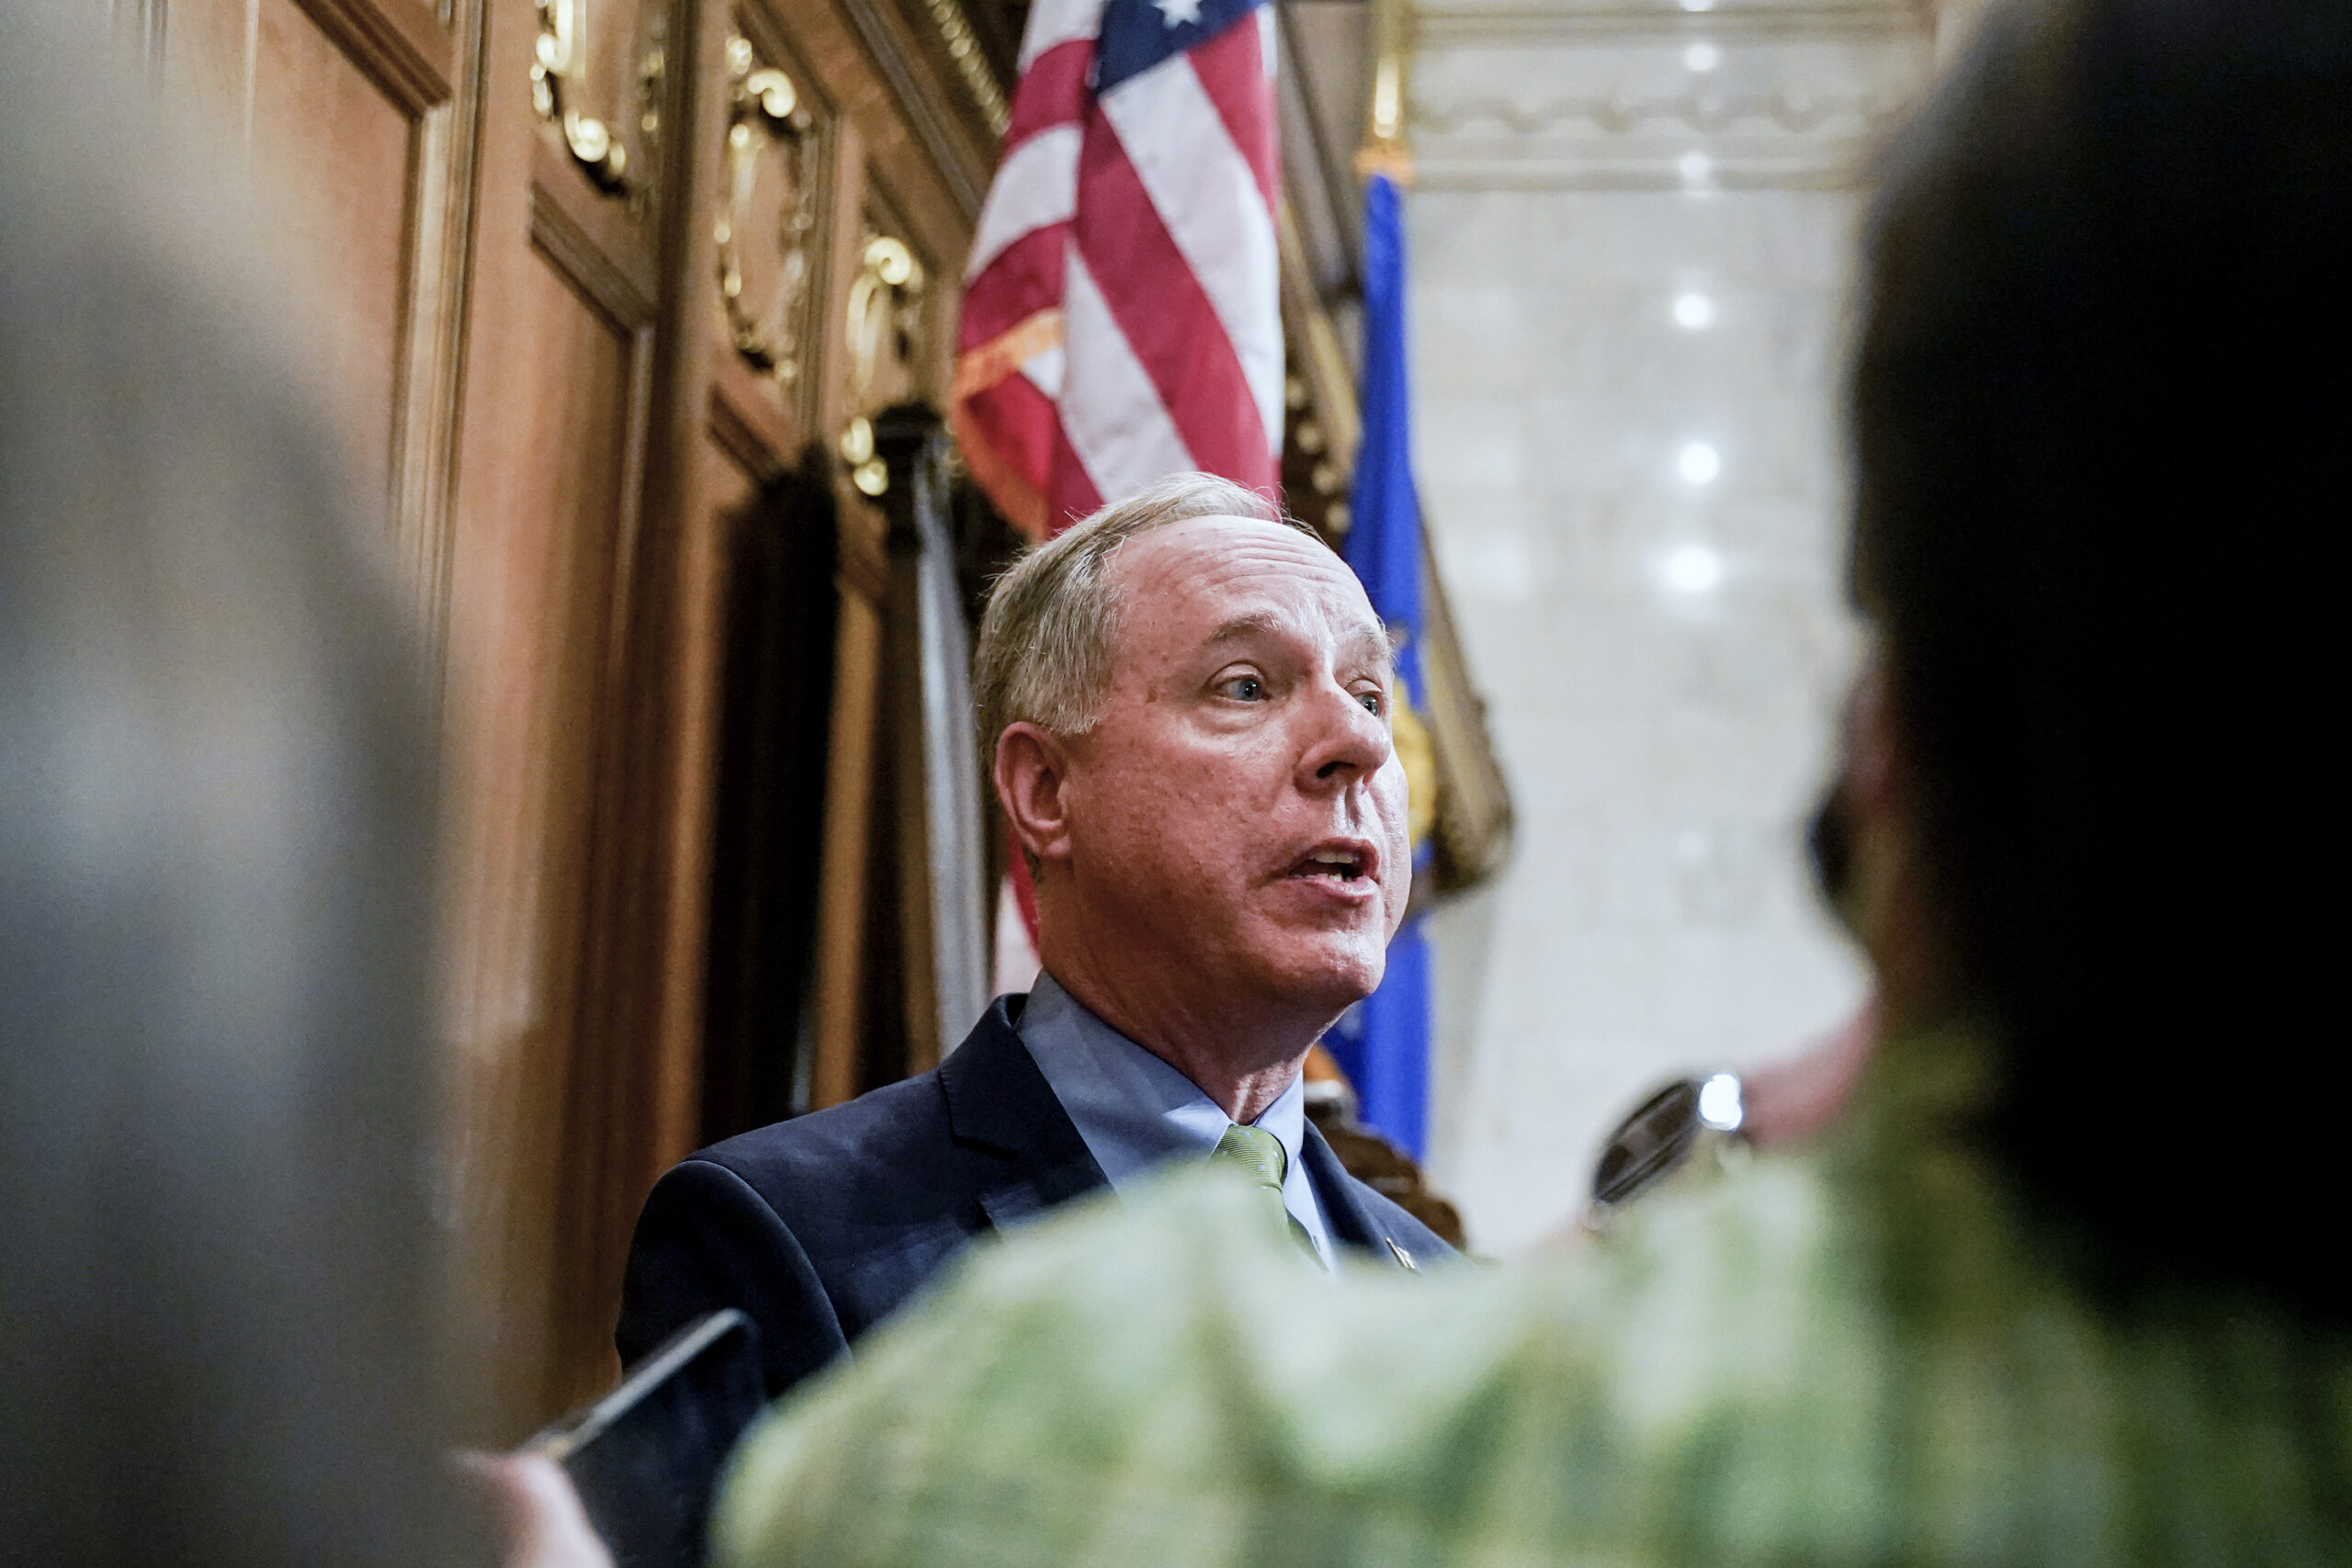 Dueling radio ads in southeastern Wisconsin call for, against recalling Robin Vos